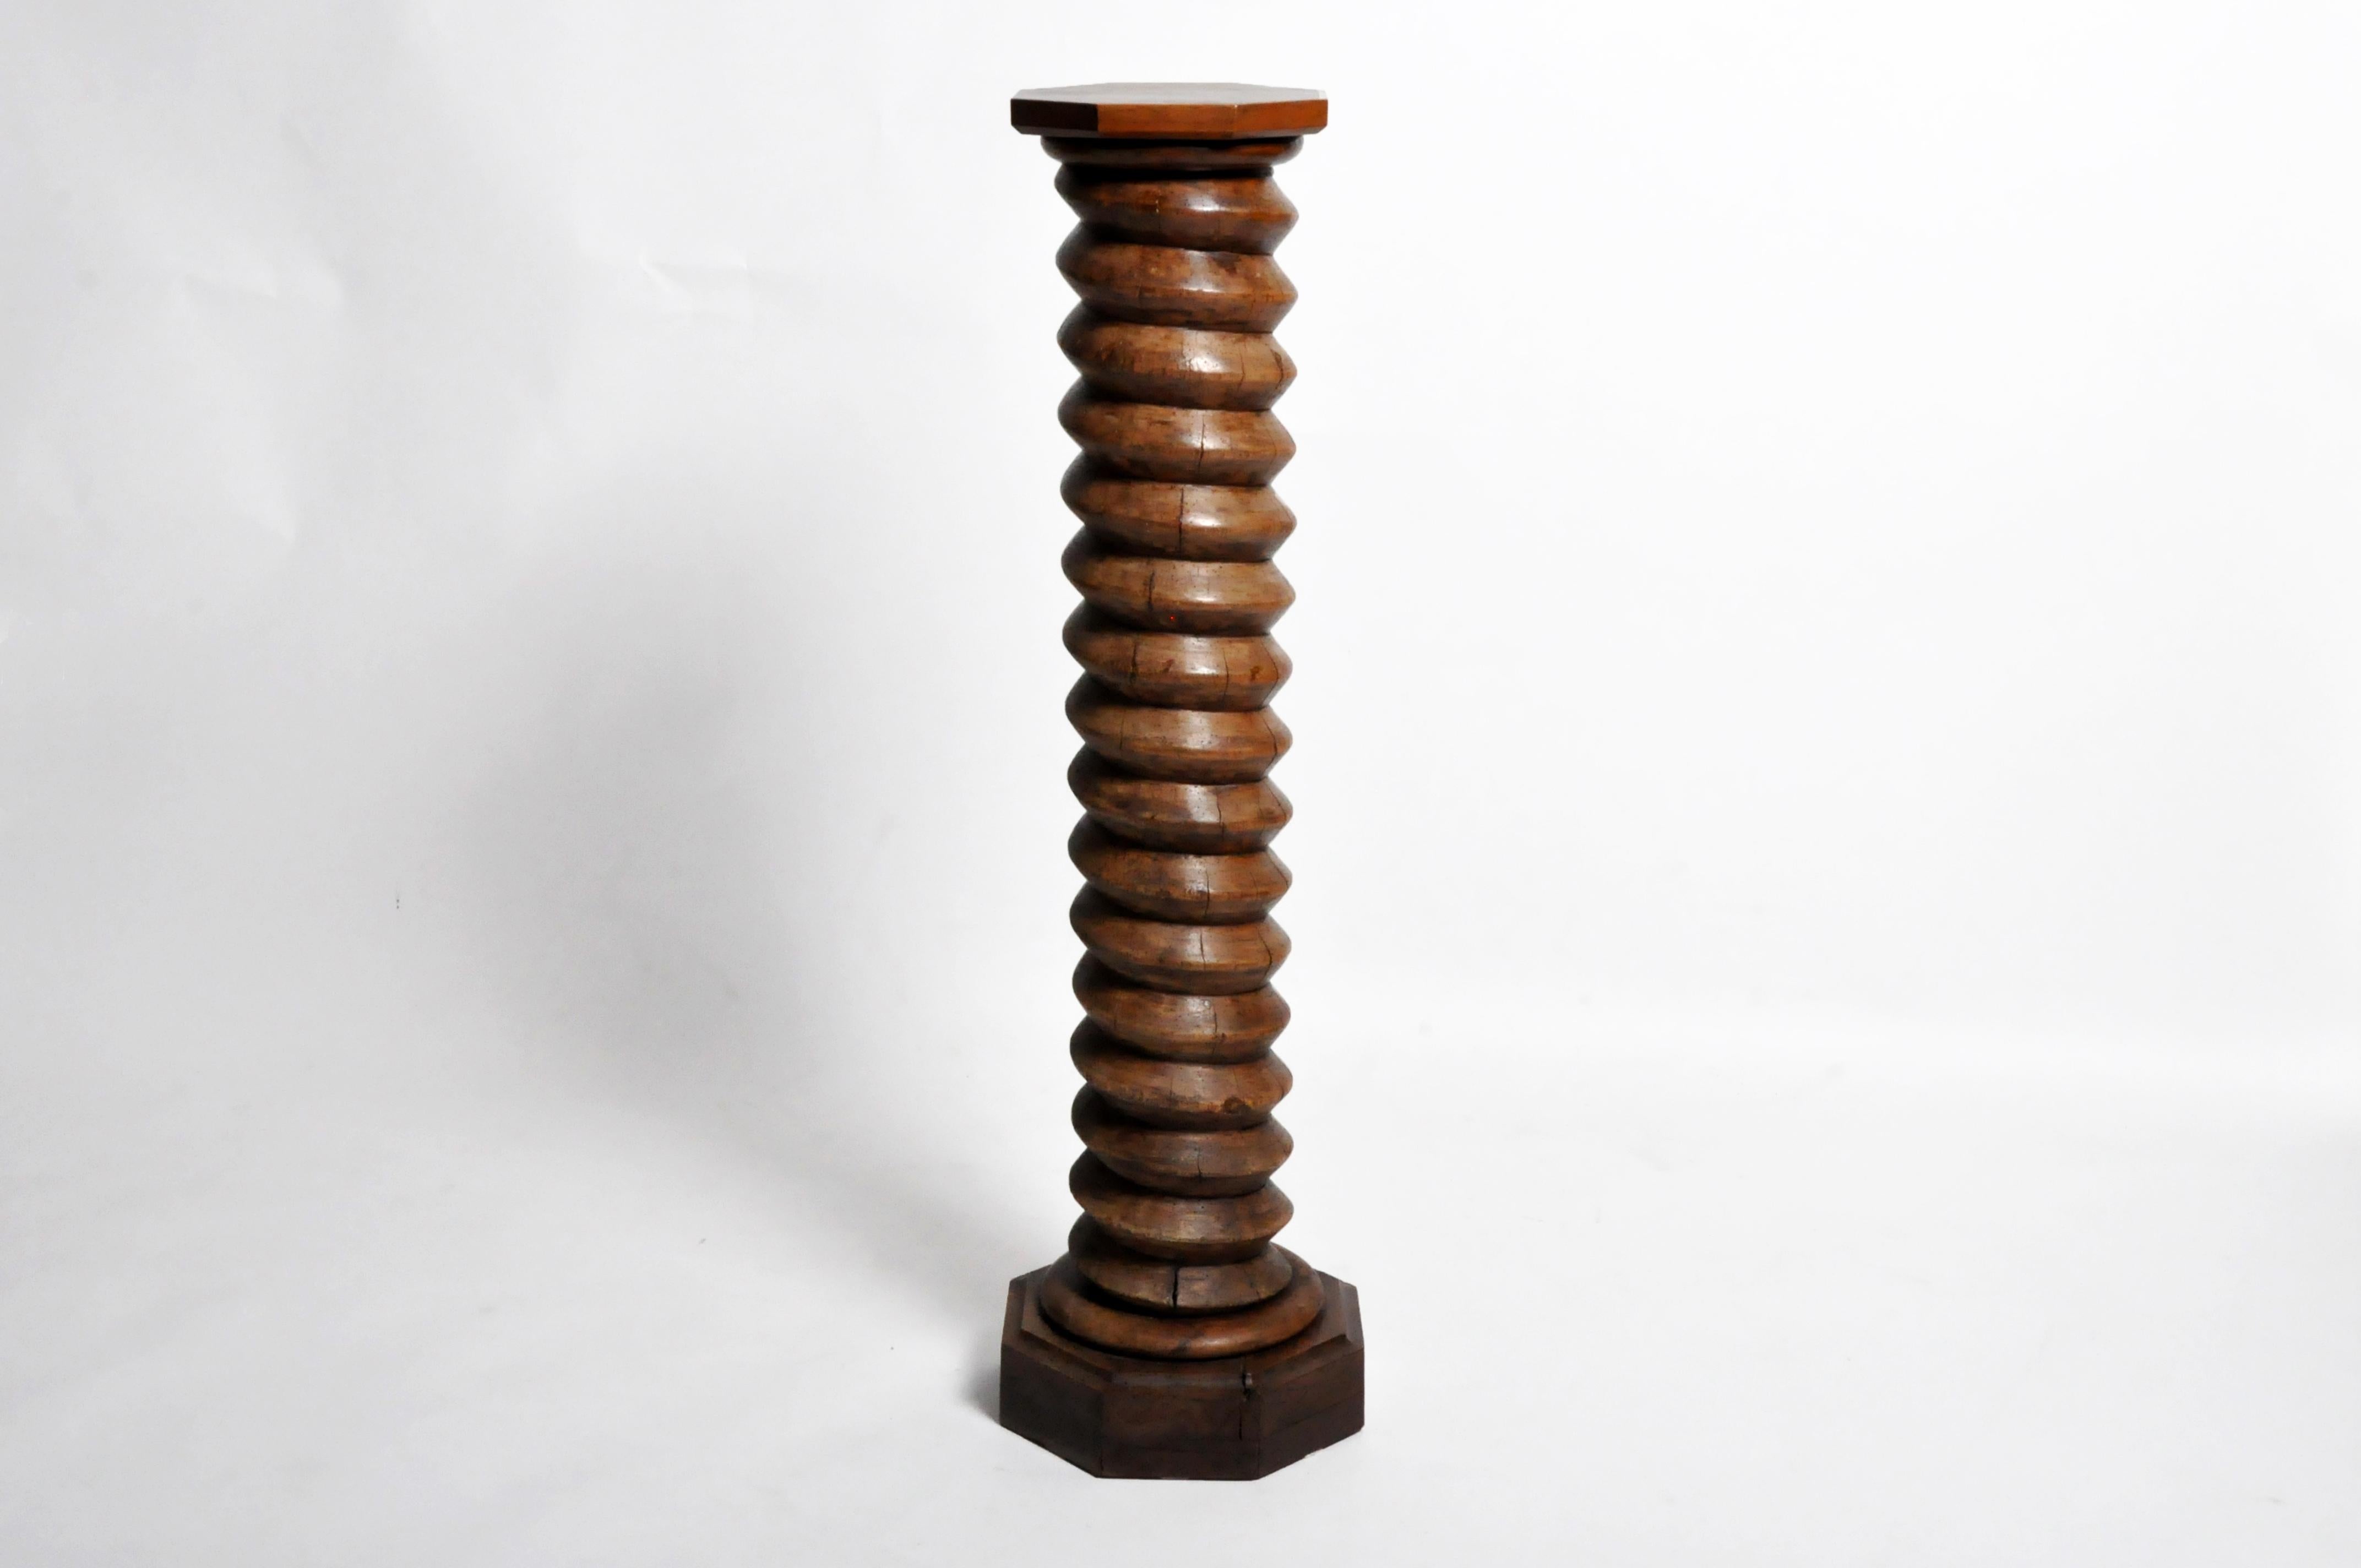 Wine presses have been used for centuries the earliest one discovered dates back 6,000 years. This 19th century hand carved screw was likely salvaged from a basket press or horizontal screw press used in a French vineyard. The shelf on top and